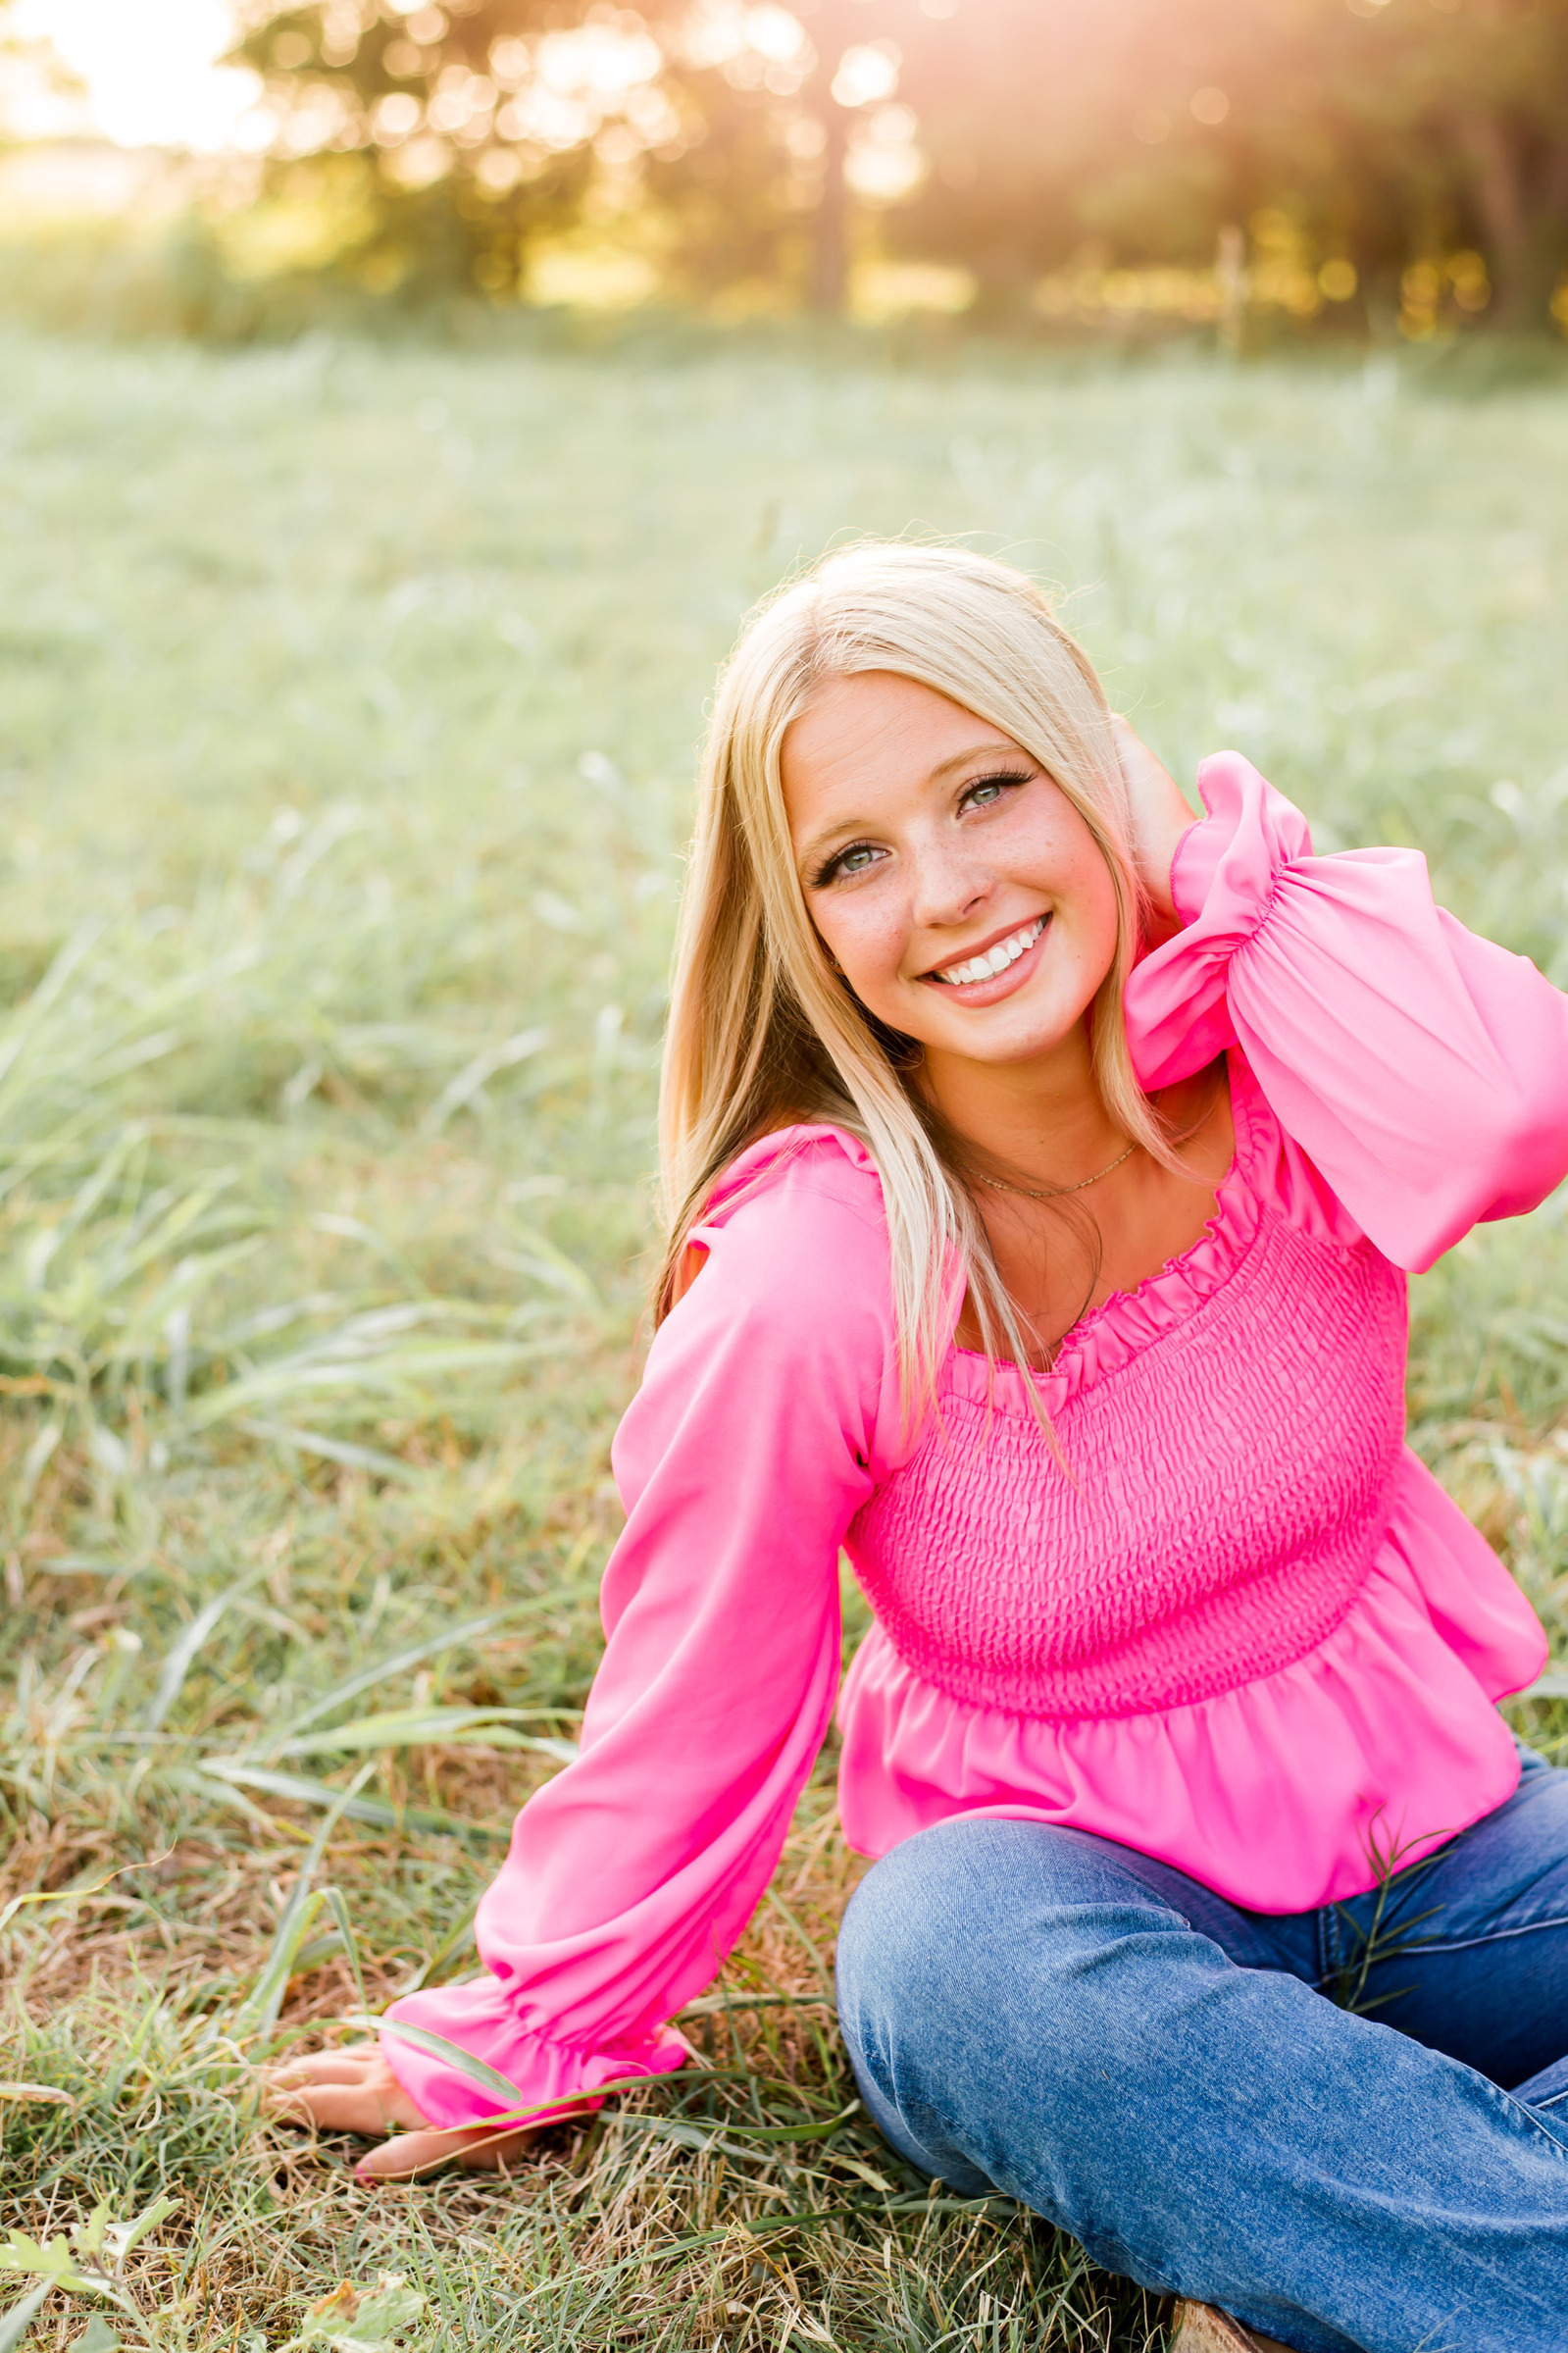 blond high school senior girl wearing a bright pink ruffle top and blue jeans sits and smiles in a field with golden light behind her